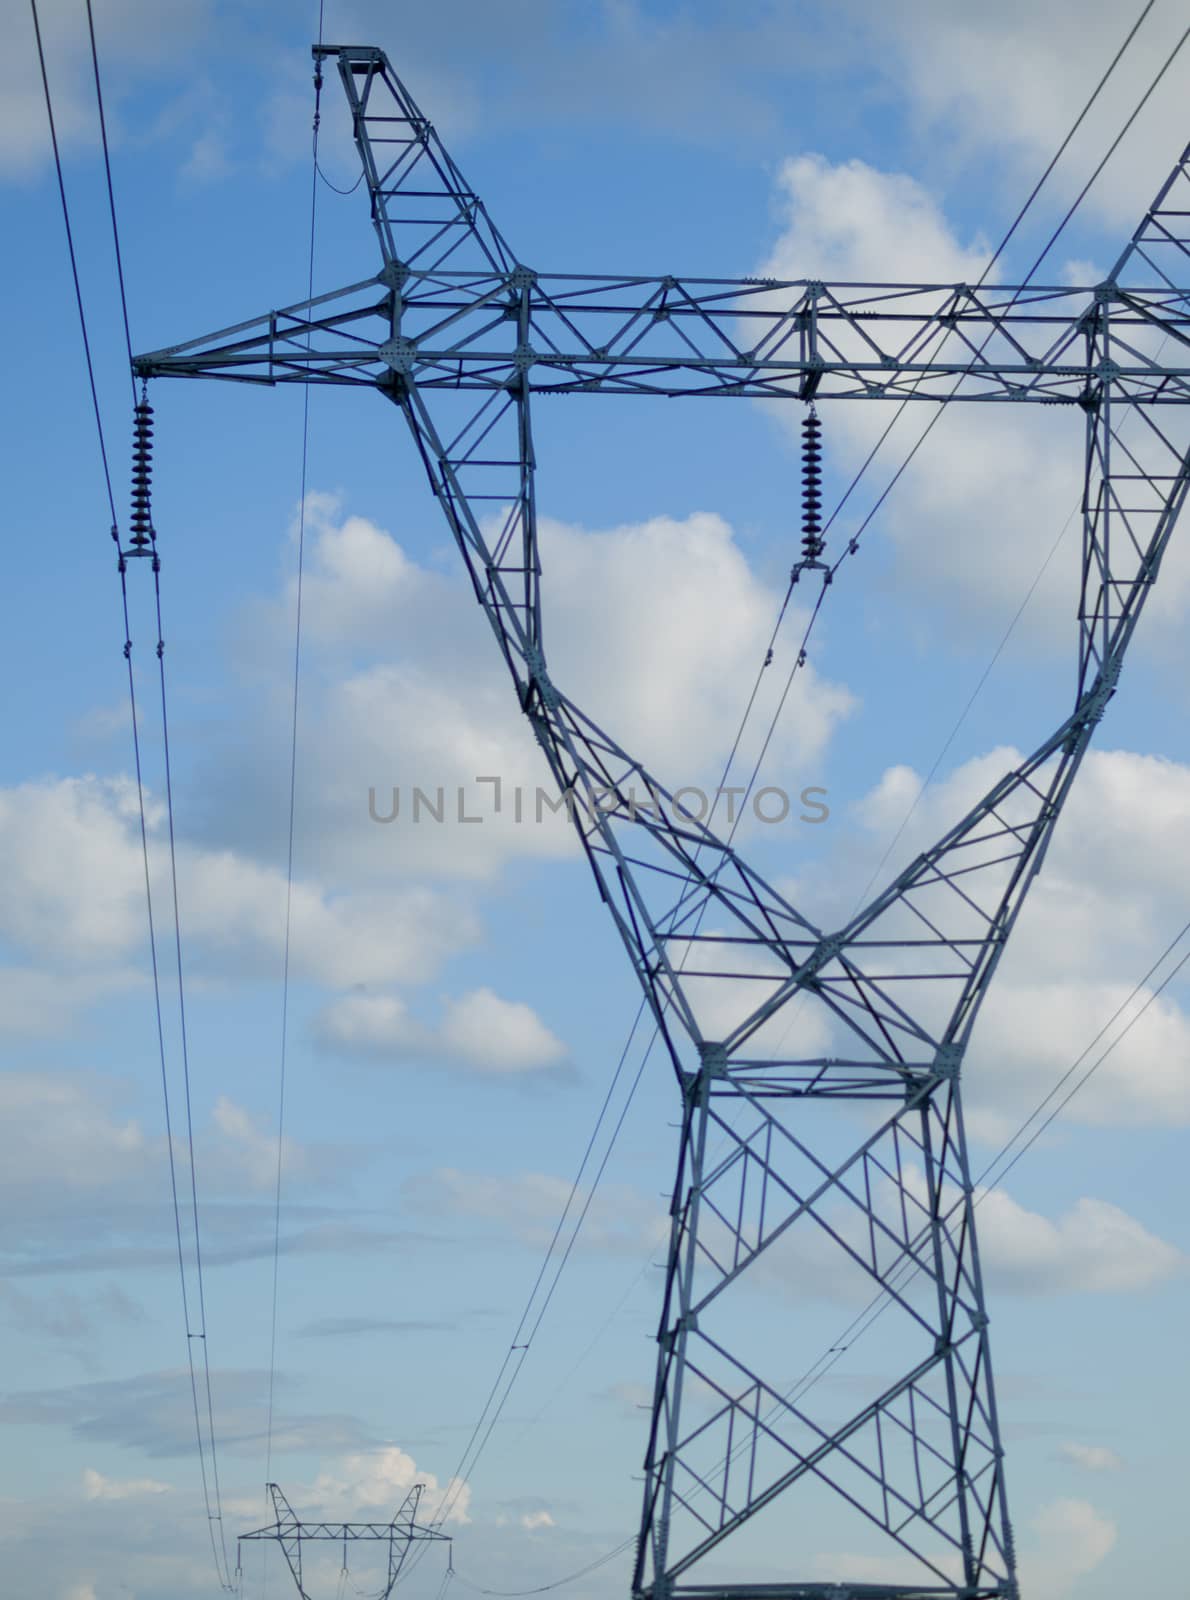 COLOR PHOTO OF TRANSMISSION TOWER OR ELECTRICITY PYLON